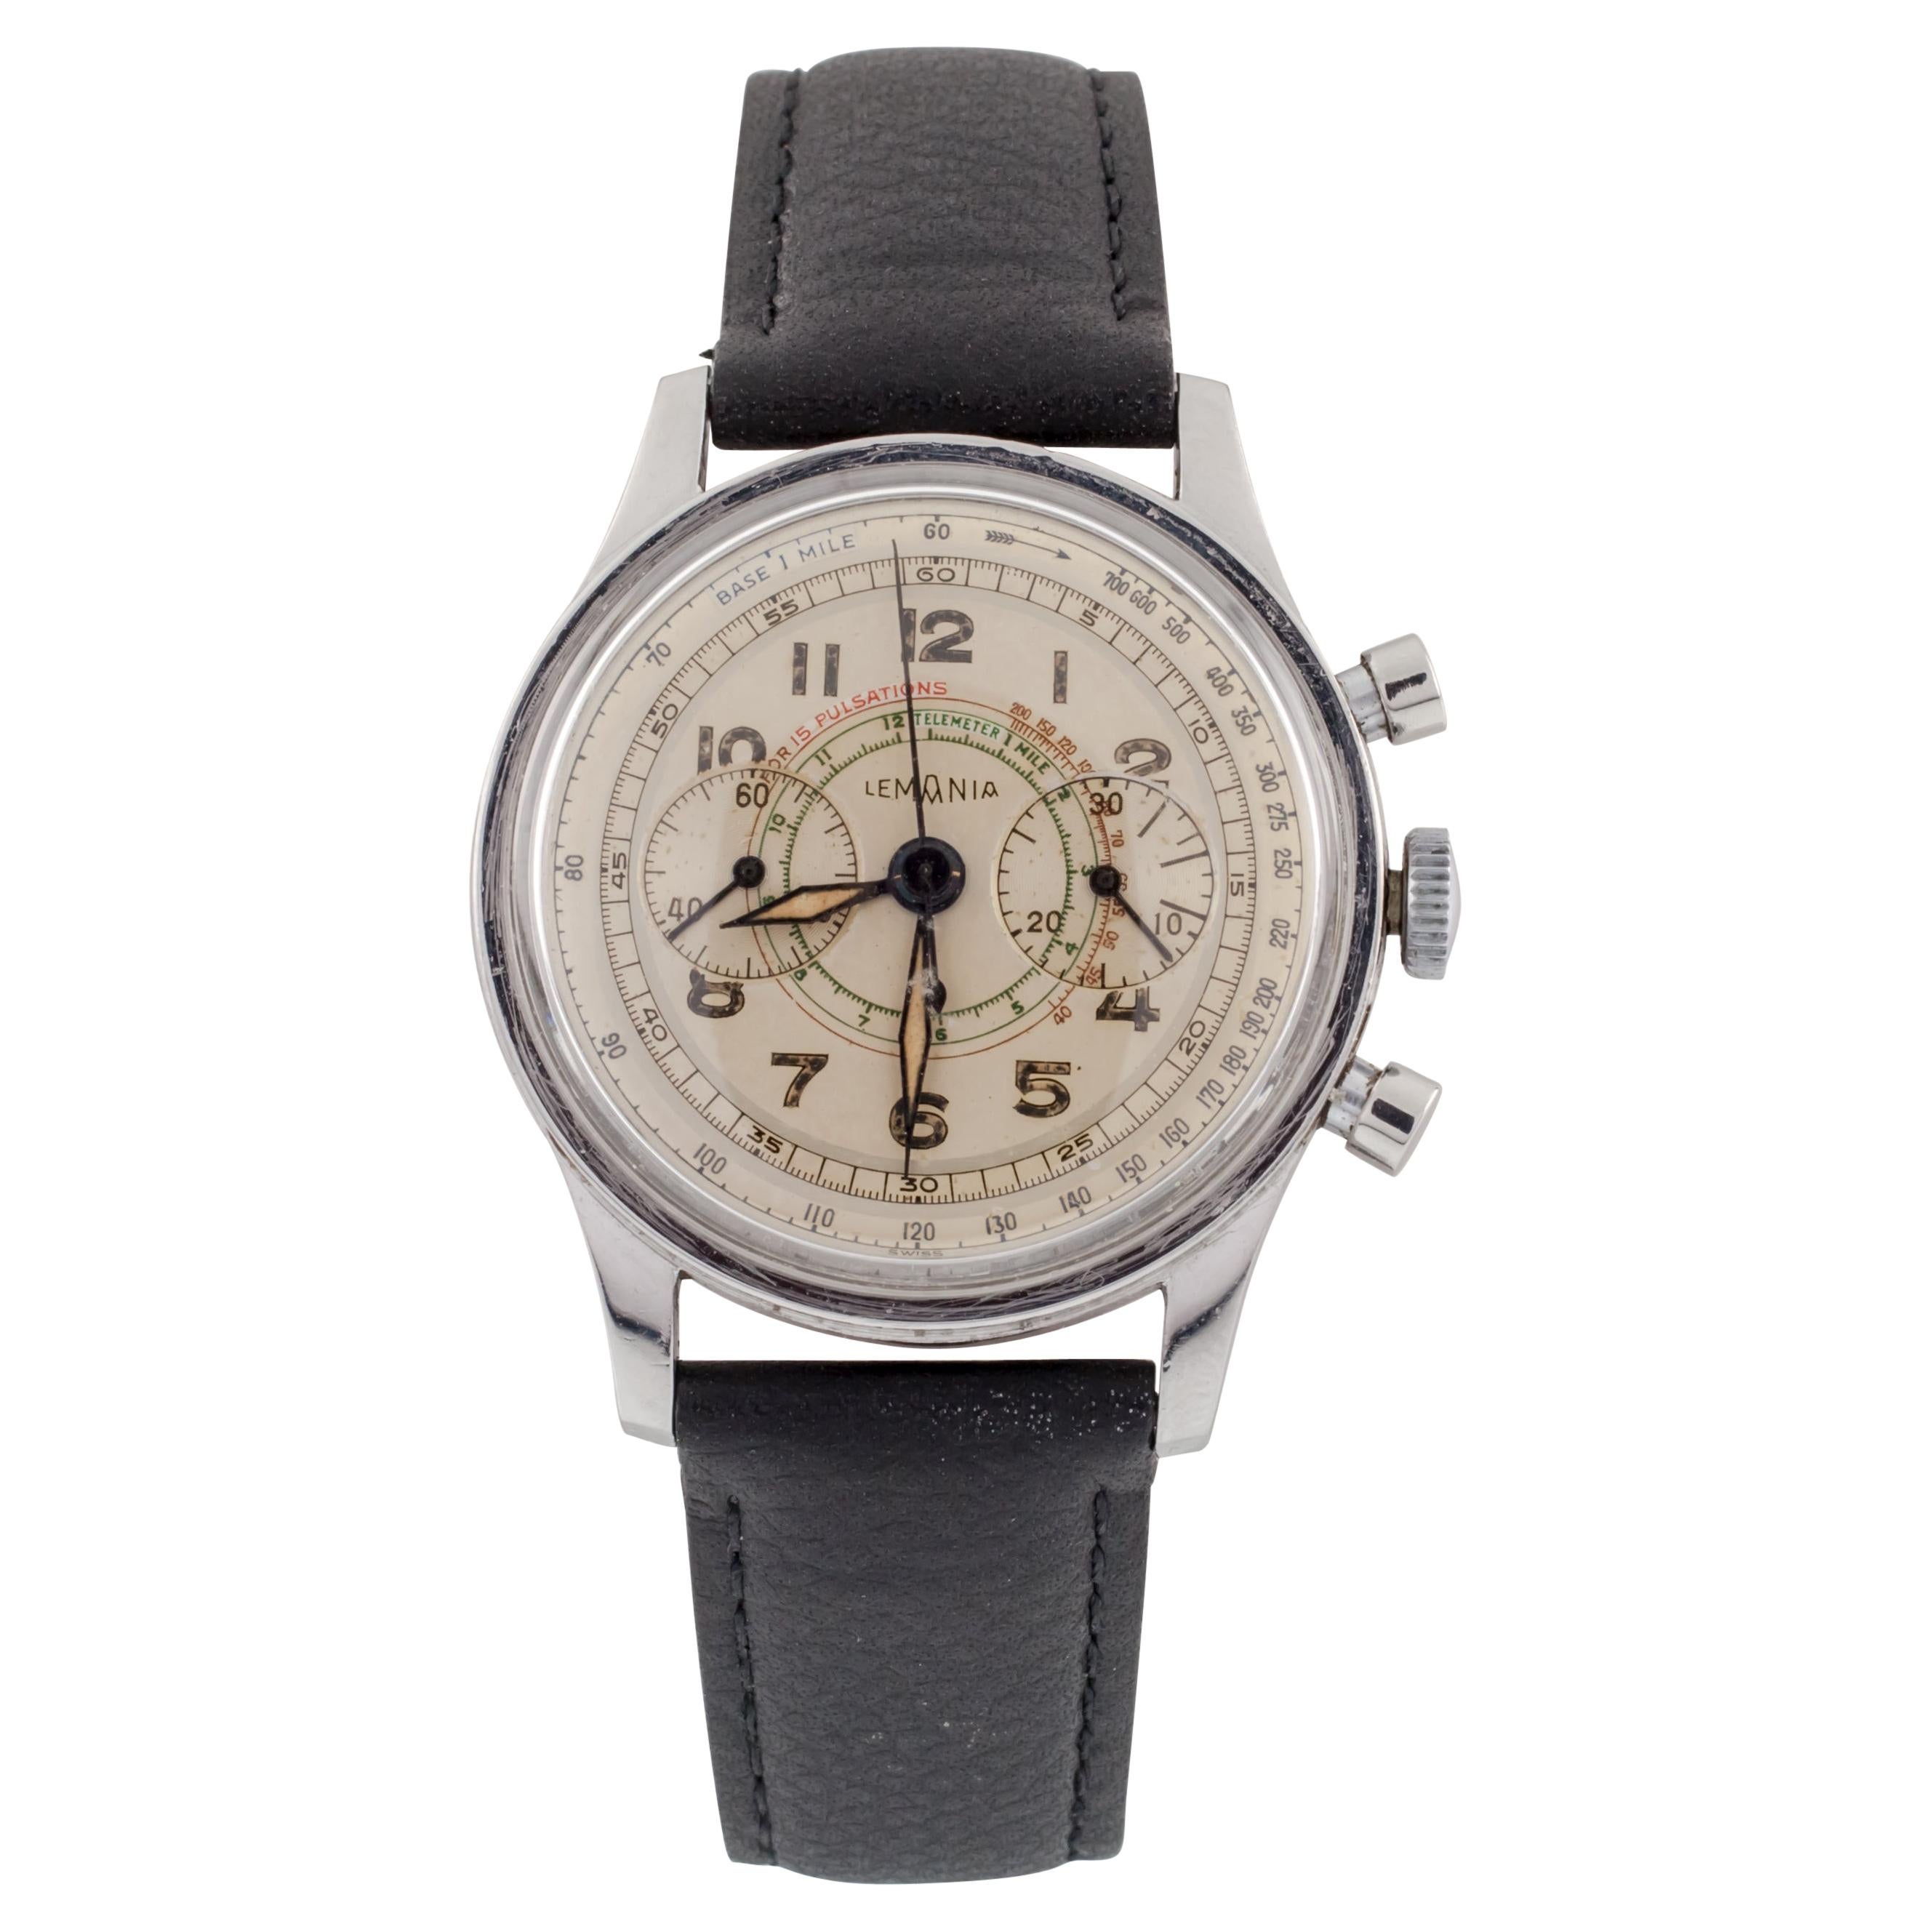 Lemania Stainless Steel 15TL Chronograph Watch Tachymeter 1940s Leather Band For Sale